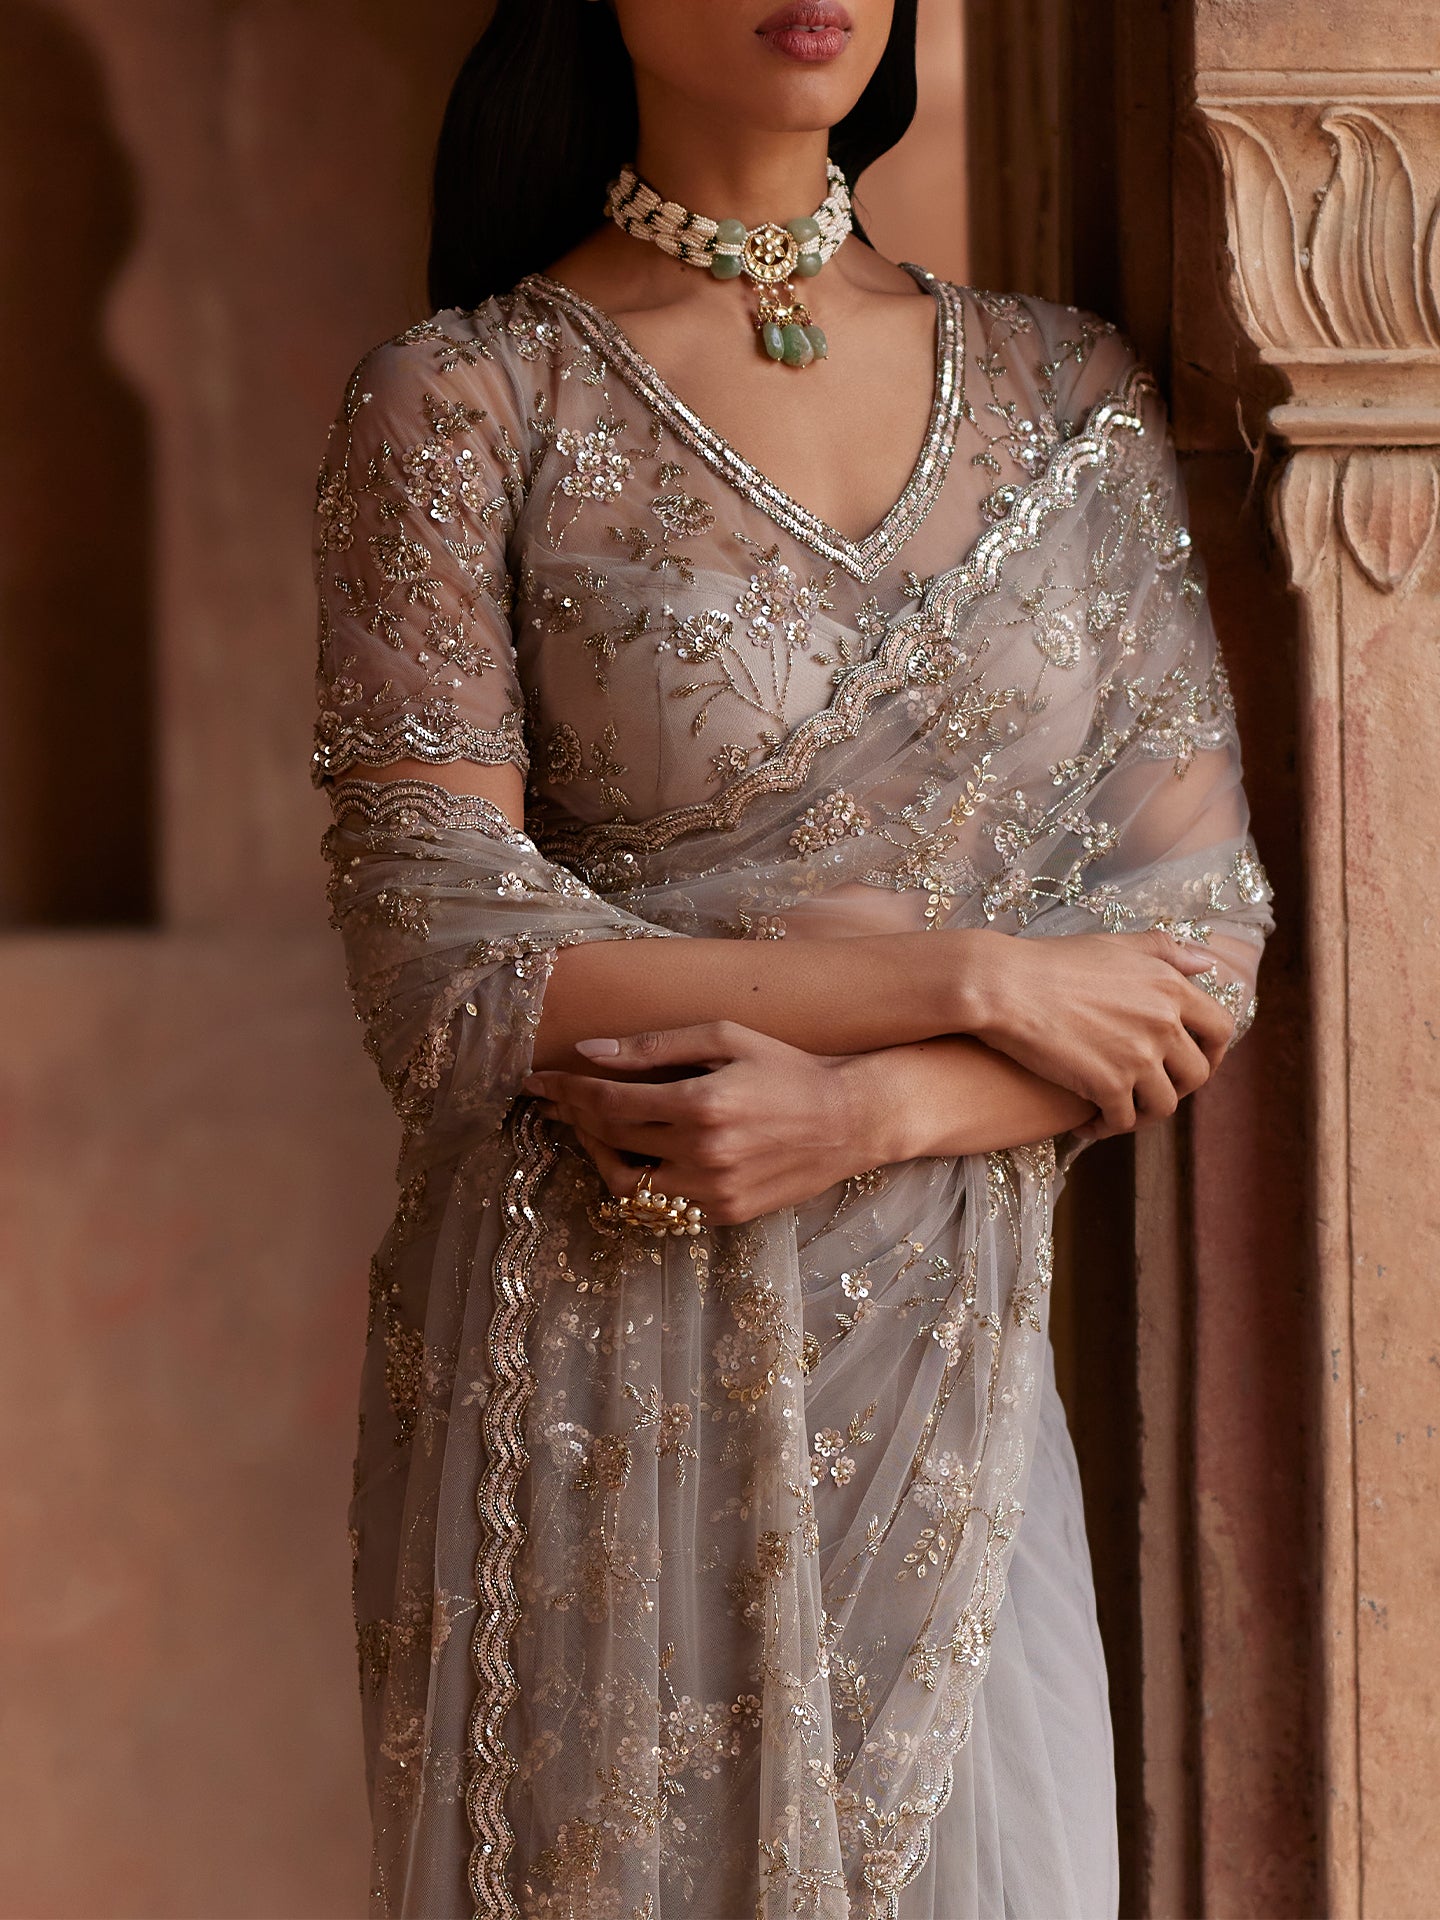 Grey Mauve tone Saree in Lycra Net with Katdana & Sequence Cutwork Border Embroidery